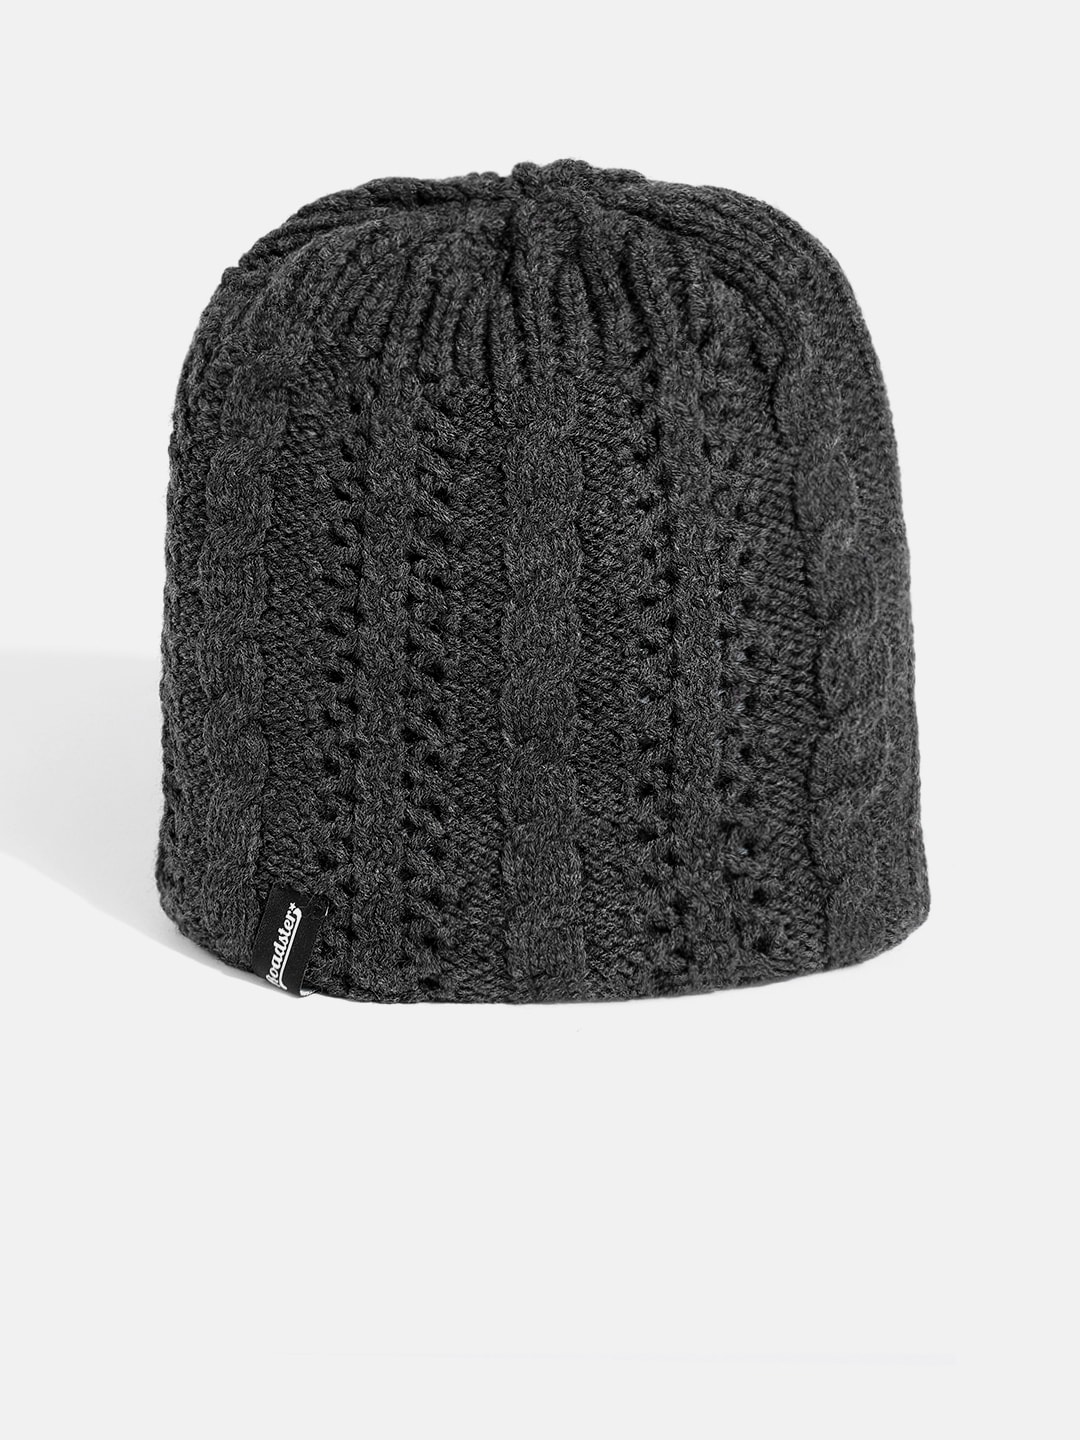 The Roadster Lifestyle Co Unisex Charcoal Grey Cable Knit Beanie Price in India